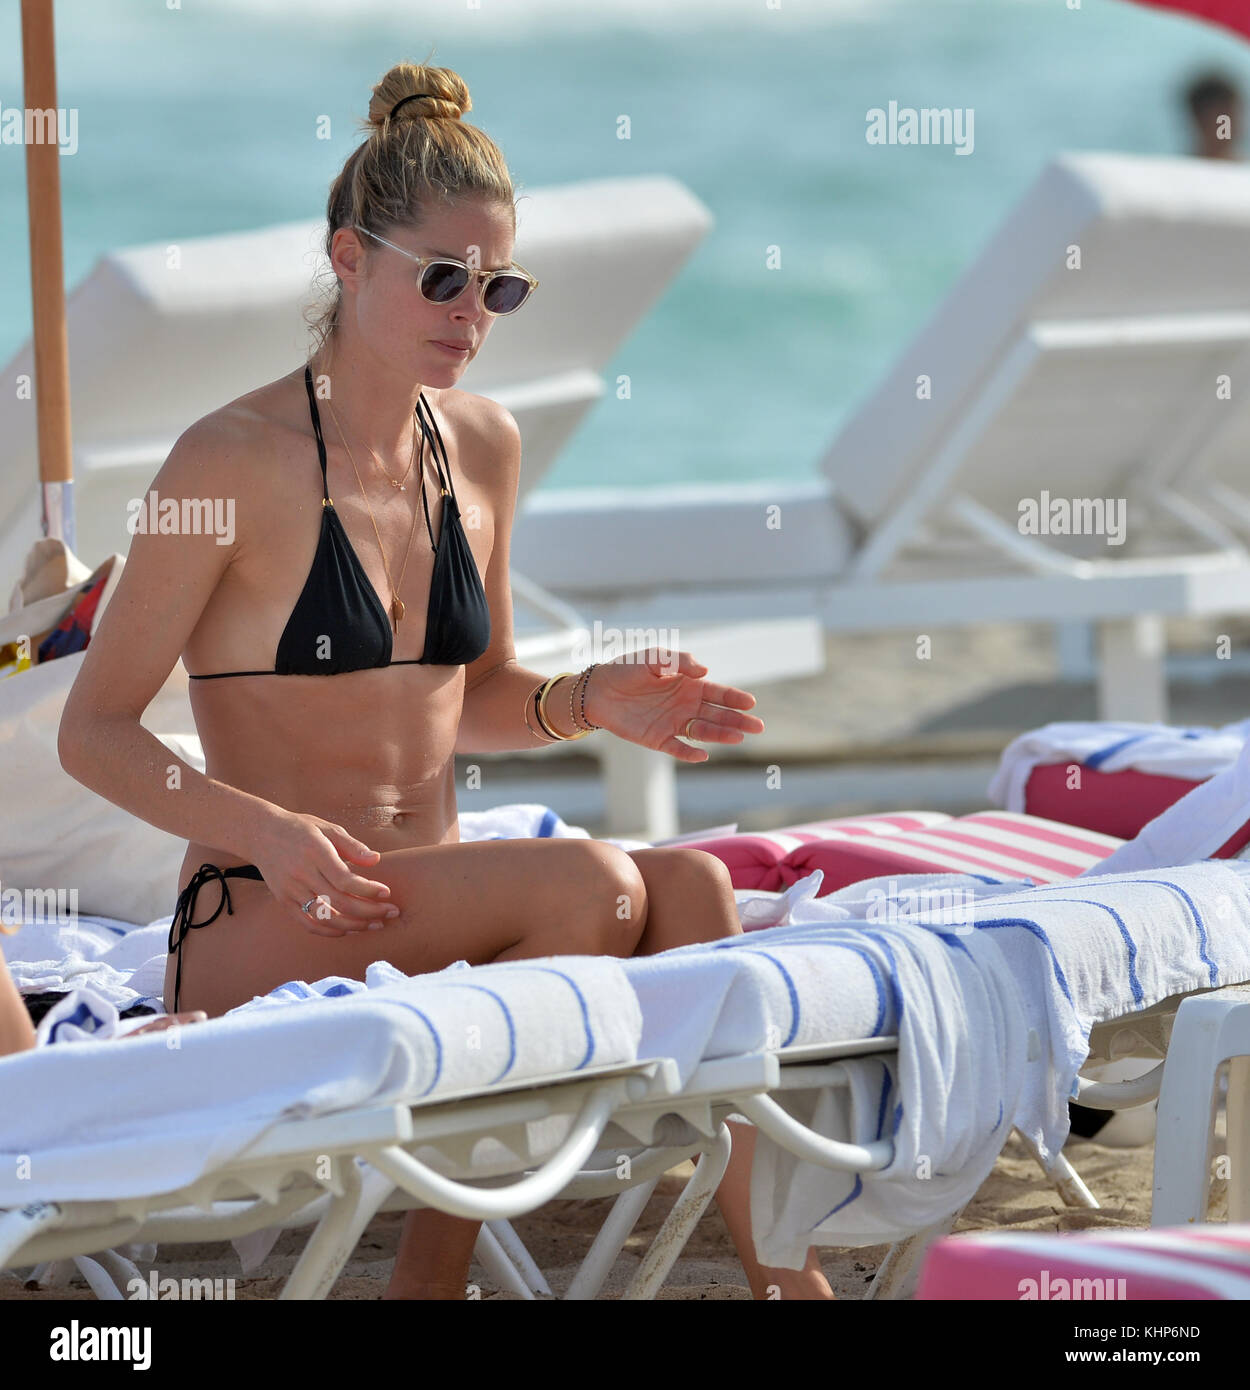 MIAMI, FL - JANUARY 03: Victoria's Secret supermodel Doutzen Kroes looks like she's on her last nerve when her kids looked like they were having temper tantrums at the beach. Doutzen was wearing a skimpy black triangle string bikini as she tried to hold it together and cheer up, her son Phyllon, five, and daughter Myllena. A few minuets later the family left the beach perhaps for a much needed nap for everyone on January 3, 2017 in Miami  Florida  People:  Doutzen Kroes Stock Photo